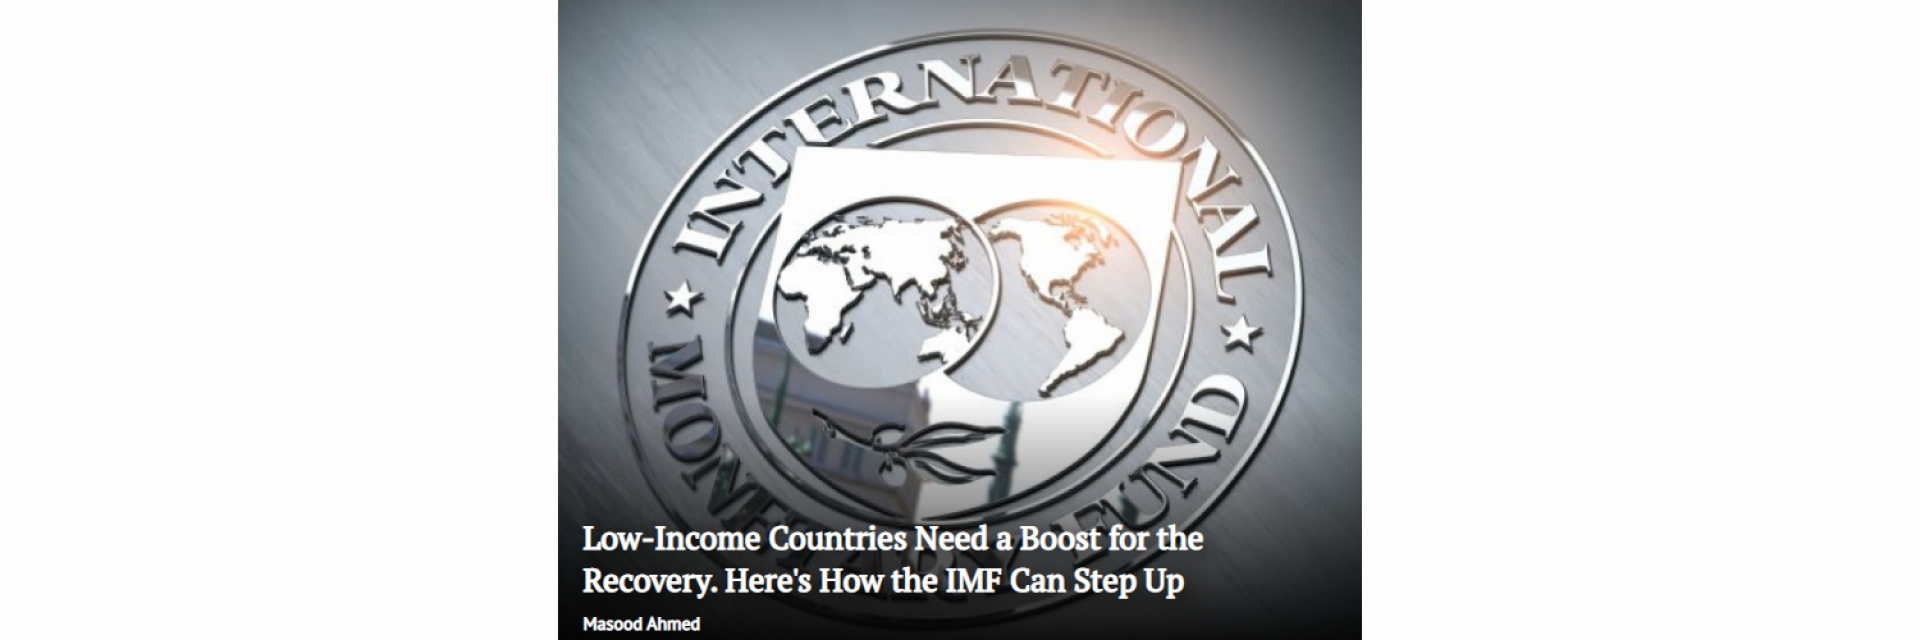 Low-Income Countries Need a Boost for the Recovery. Here's How the IMF Can Step Up